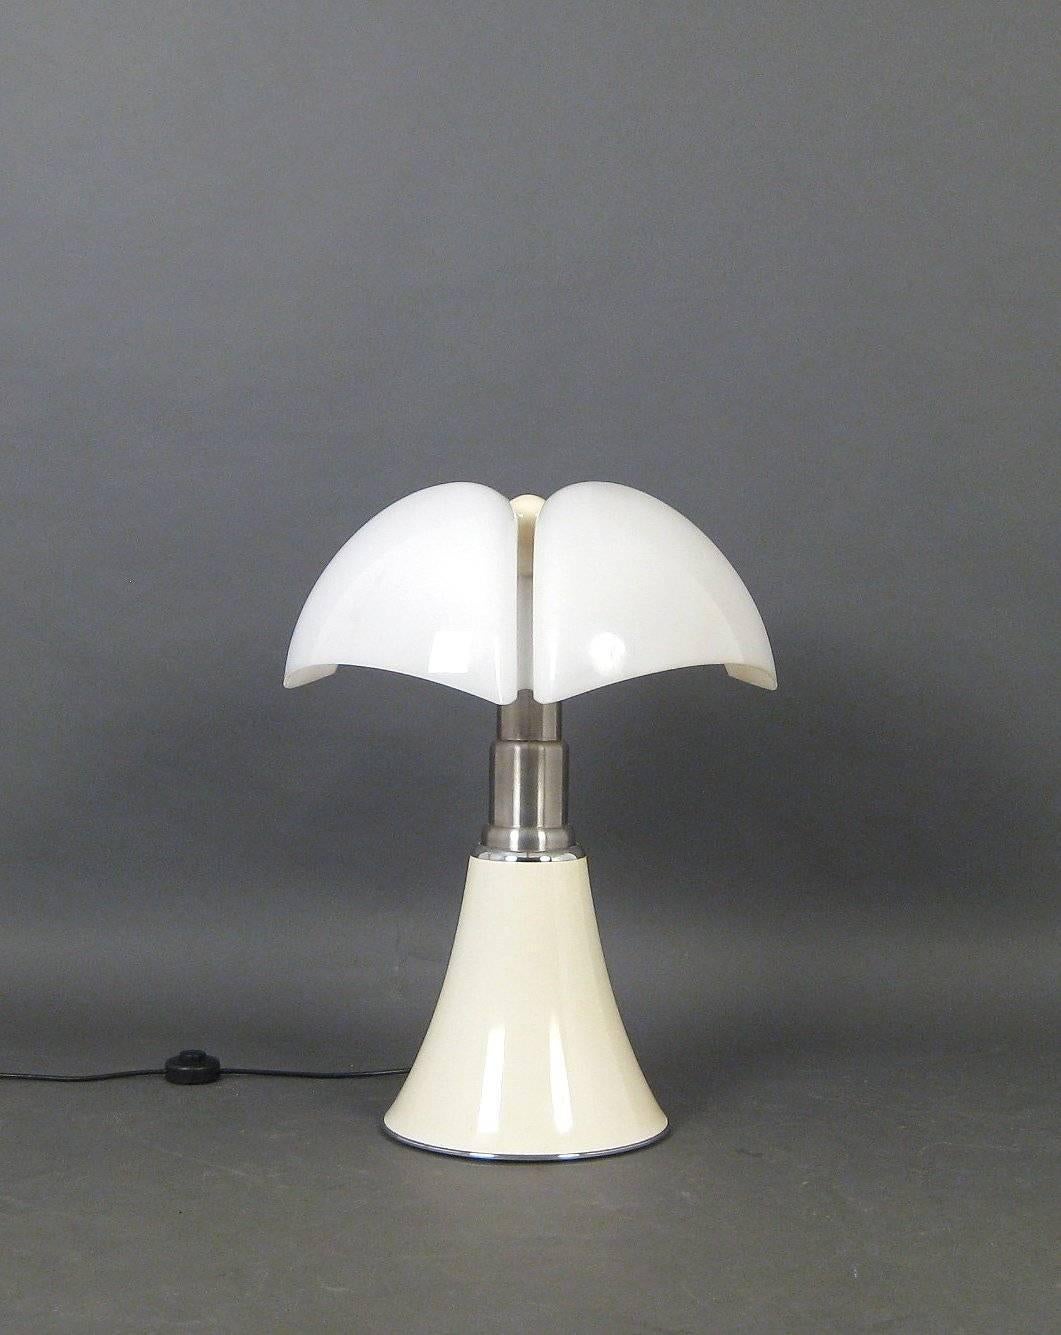 Mid-Century Modern Large Pipistrelli Lamp by Gae Aulenti for Martinelli Luce